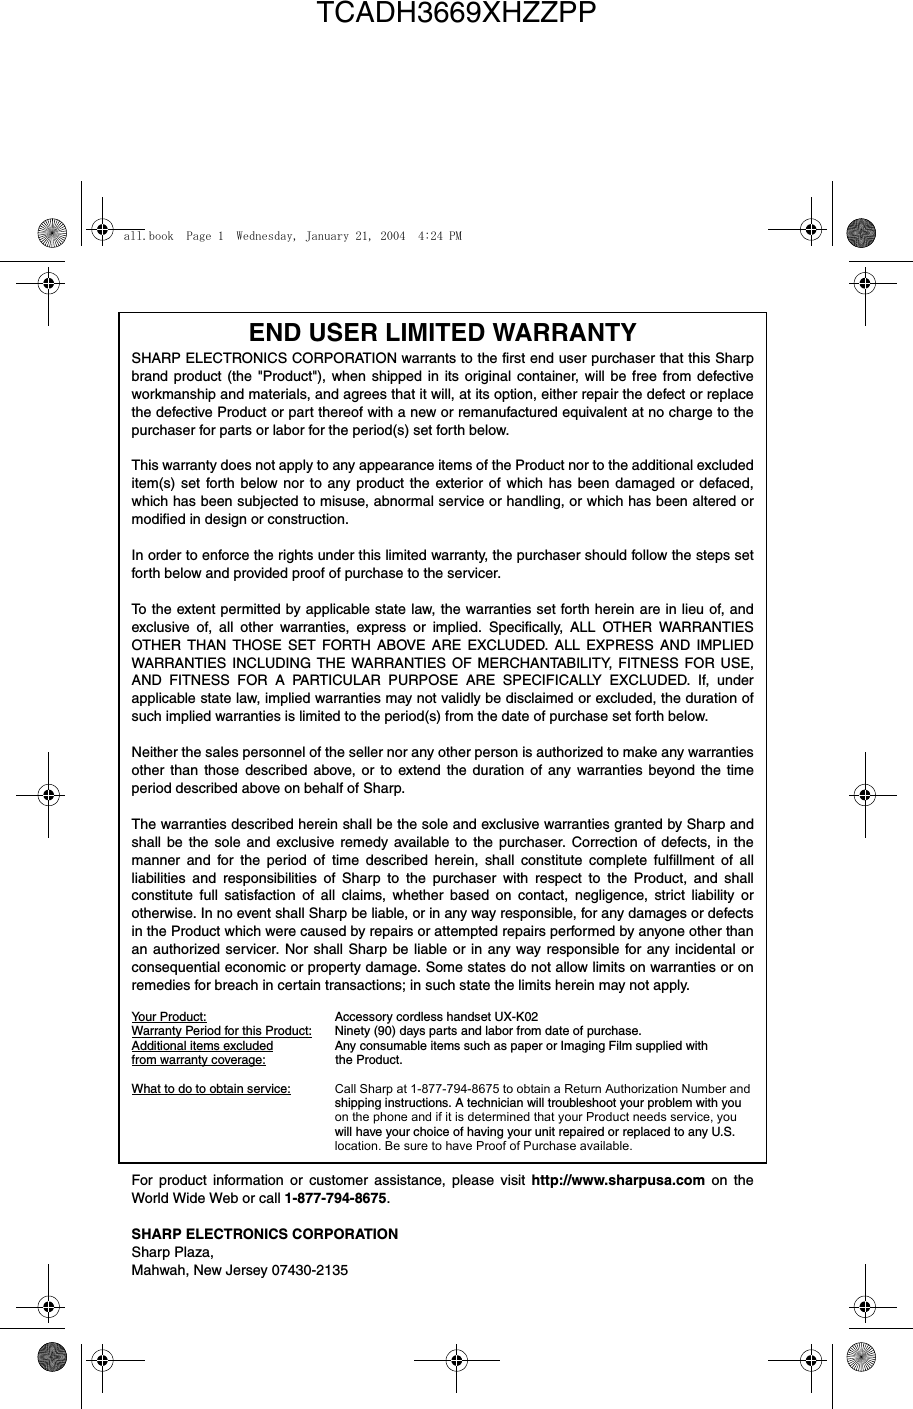 END USER LIMITED WARRANTY SHARP ELECTRONICS CORPORATION warrants to the first end user purchaser that this Sharpbrand product (the &quot;Product&quot;), when shipped in its original container, will be free from defectiveworkmanship and materials, and agrees that it will, at its option, either repair the defect or replacethe defective Product or part thereof with a new or remanufactured equivalent at no charge to thepurchaser for parts or labor for the period(s) set forth below. This warranty does not apply to any appearance items of the Product nor to the additional excludeditem(s) set forth below nor to any product the exterior of which has been damaged or defaced,which has been subjected to misuse, abnormal service or handling, or which has been altered ormodified in design or construction. In order to enforce the rights under this limited warranty, the purchaser should follow the steps setforth below and provided proof of purchase to the servicer. To the extent permitted by applicable state law, the warranties set forth herein are in lieu of, andexclusive of, all other warranties, express or implied. Specifically, ALL OTHER WARRANTIESOTHER THAN THOSE SET FORTH ABOVE ARE EXCLUDED. ALL EXPRESS AND IMPLIEDWARRANTIES INCLUDING THE WARRANTIES OF MERCHANTABILITY, FITNESS FOR USE,AND FITNESS FOR A PARTICULAR PURPOSE ARE SPECIFICALLY EXCLUDED. If, underapplicable state law, implied warranties may not validly be disclaimed or excluded, the duration ofsuch implied warranties is limited to the period(s) from the date of purchase set forth below. Neither the sales personnel of the seller nor any other person is authorized to make any warrantiesother than those described above, or to extend the duration of any warranties beyond the timeperiod described above on behalf of Sharp. The warranties described herein shall be the sole and exclusive warranties granted by Sharp andshall be the sole and exclusive remedy available to the purchaser. Correction of defects, in themanner and for the period of time described herein, shall constitute complete fulfillment of allliabilities and responsibilities of Sharp to the purchaser with respect to the Product, and shallconstitute full satisfaction of all claims, whether based on contact, negligence, strict liability orotherwise. In no event shall Sharp be liable, or in any way responsible, for any damages or defectsin the Product which were caused by repairs or attempted repairs performed by anyone other thanan authorized servicer. Nor shall Sharp be liable or in any way responsible for any incidental orconsequential economic or property damage. Some states do not allow limits on warranties or onremedies for breach in certain transactions; in such state the limits herein may not apply. Your Product: Accessory cordless handset UX-K02 Warranty Period for this Product: Ninety (90) days parts and labor from date of purchase. Additional items excluded Any consumable items such as paper or Imaging Film supplied with from warranty coverage:                    the Product.                     What to do to obtain service: Call Sharp at 1-877-794-8675 to obtain a Return Authorization Number and shipping instructions. A technician will troubleshoot your problem with youon the phone and if it is determined that your Product needs service, youwill have your choice of having your unit repaired or replaced to any U.S.location. Be sure to have Proof of Purchase available. For product information or customer assistance, please visit http://www.sharpusa.com on theWorld Wide Web or call 1-877-794-8675.SHARP ELECTRONICS CORPORATIONSharp Plaza,Mahwah, New Jersey 07430-2135all.book  Page 1  Wednesday, January 21, 2004  4:24 PMTCADH3669XHZZPP